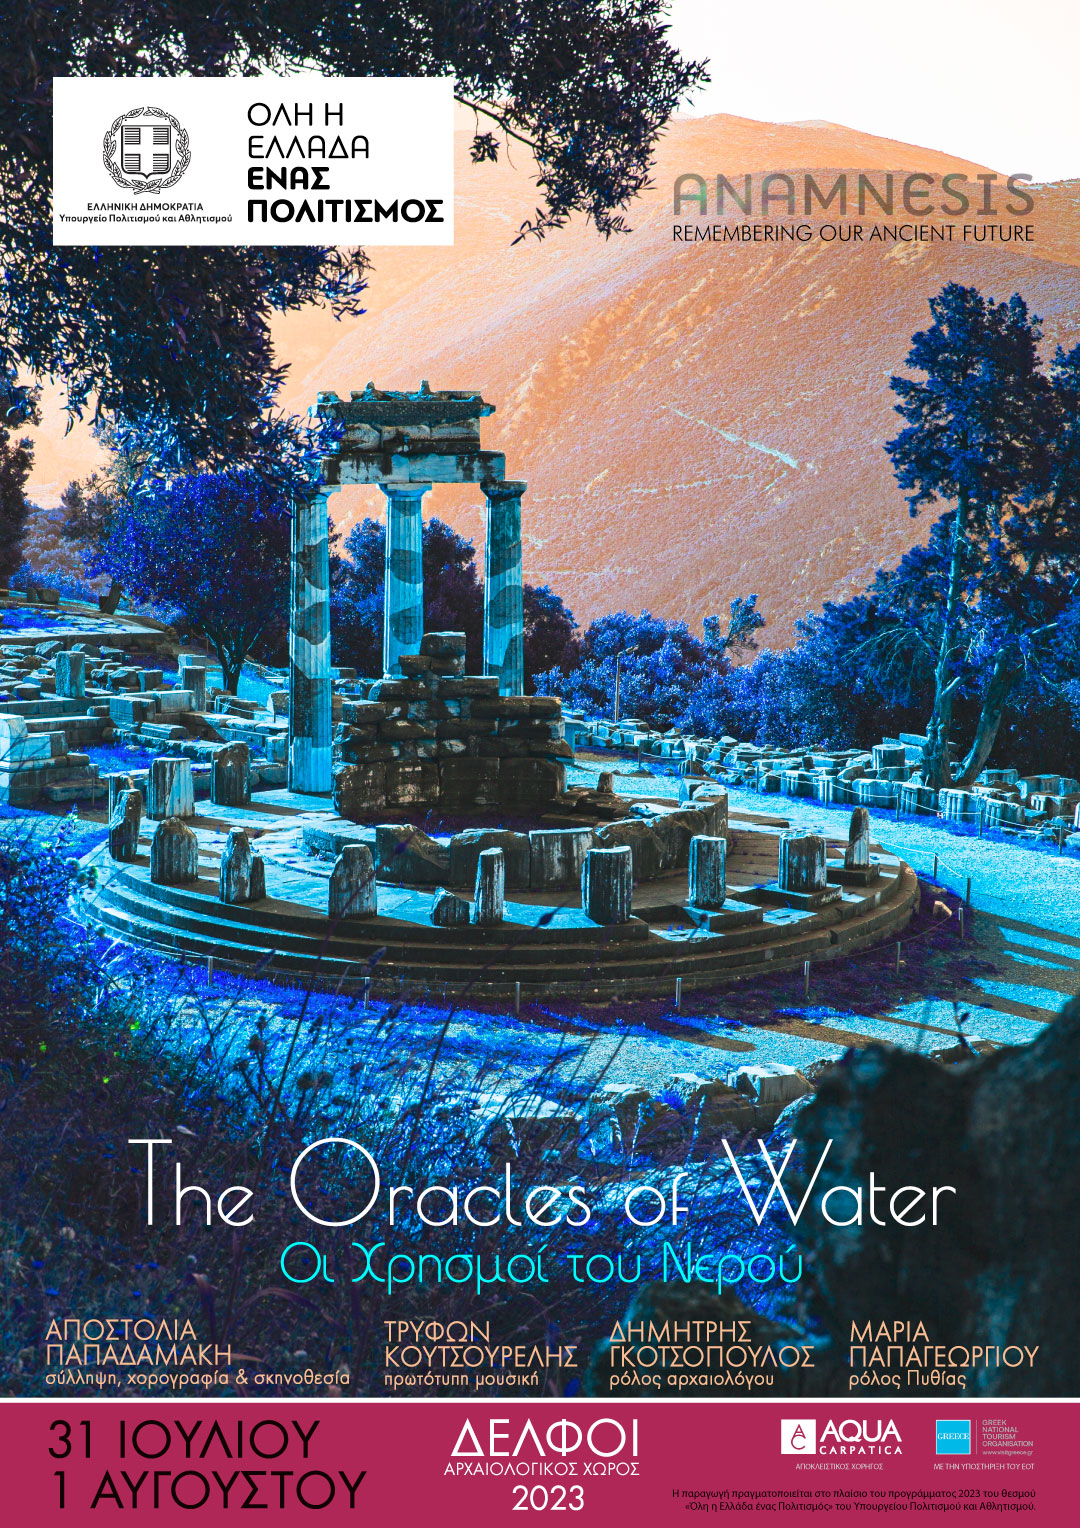 The Oracles of Water - Anamnesis Delphi